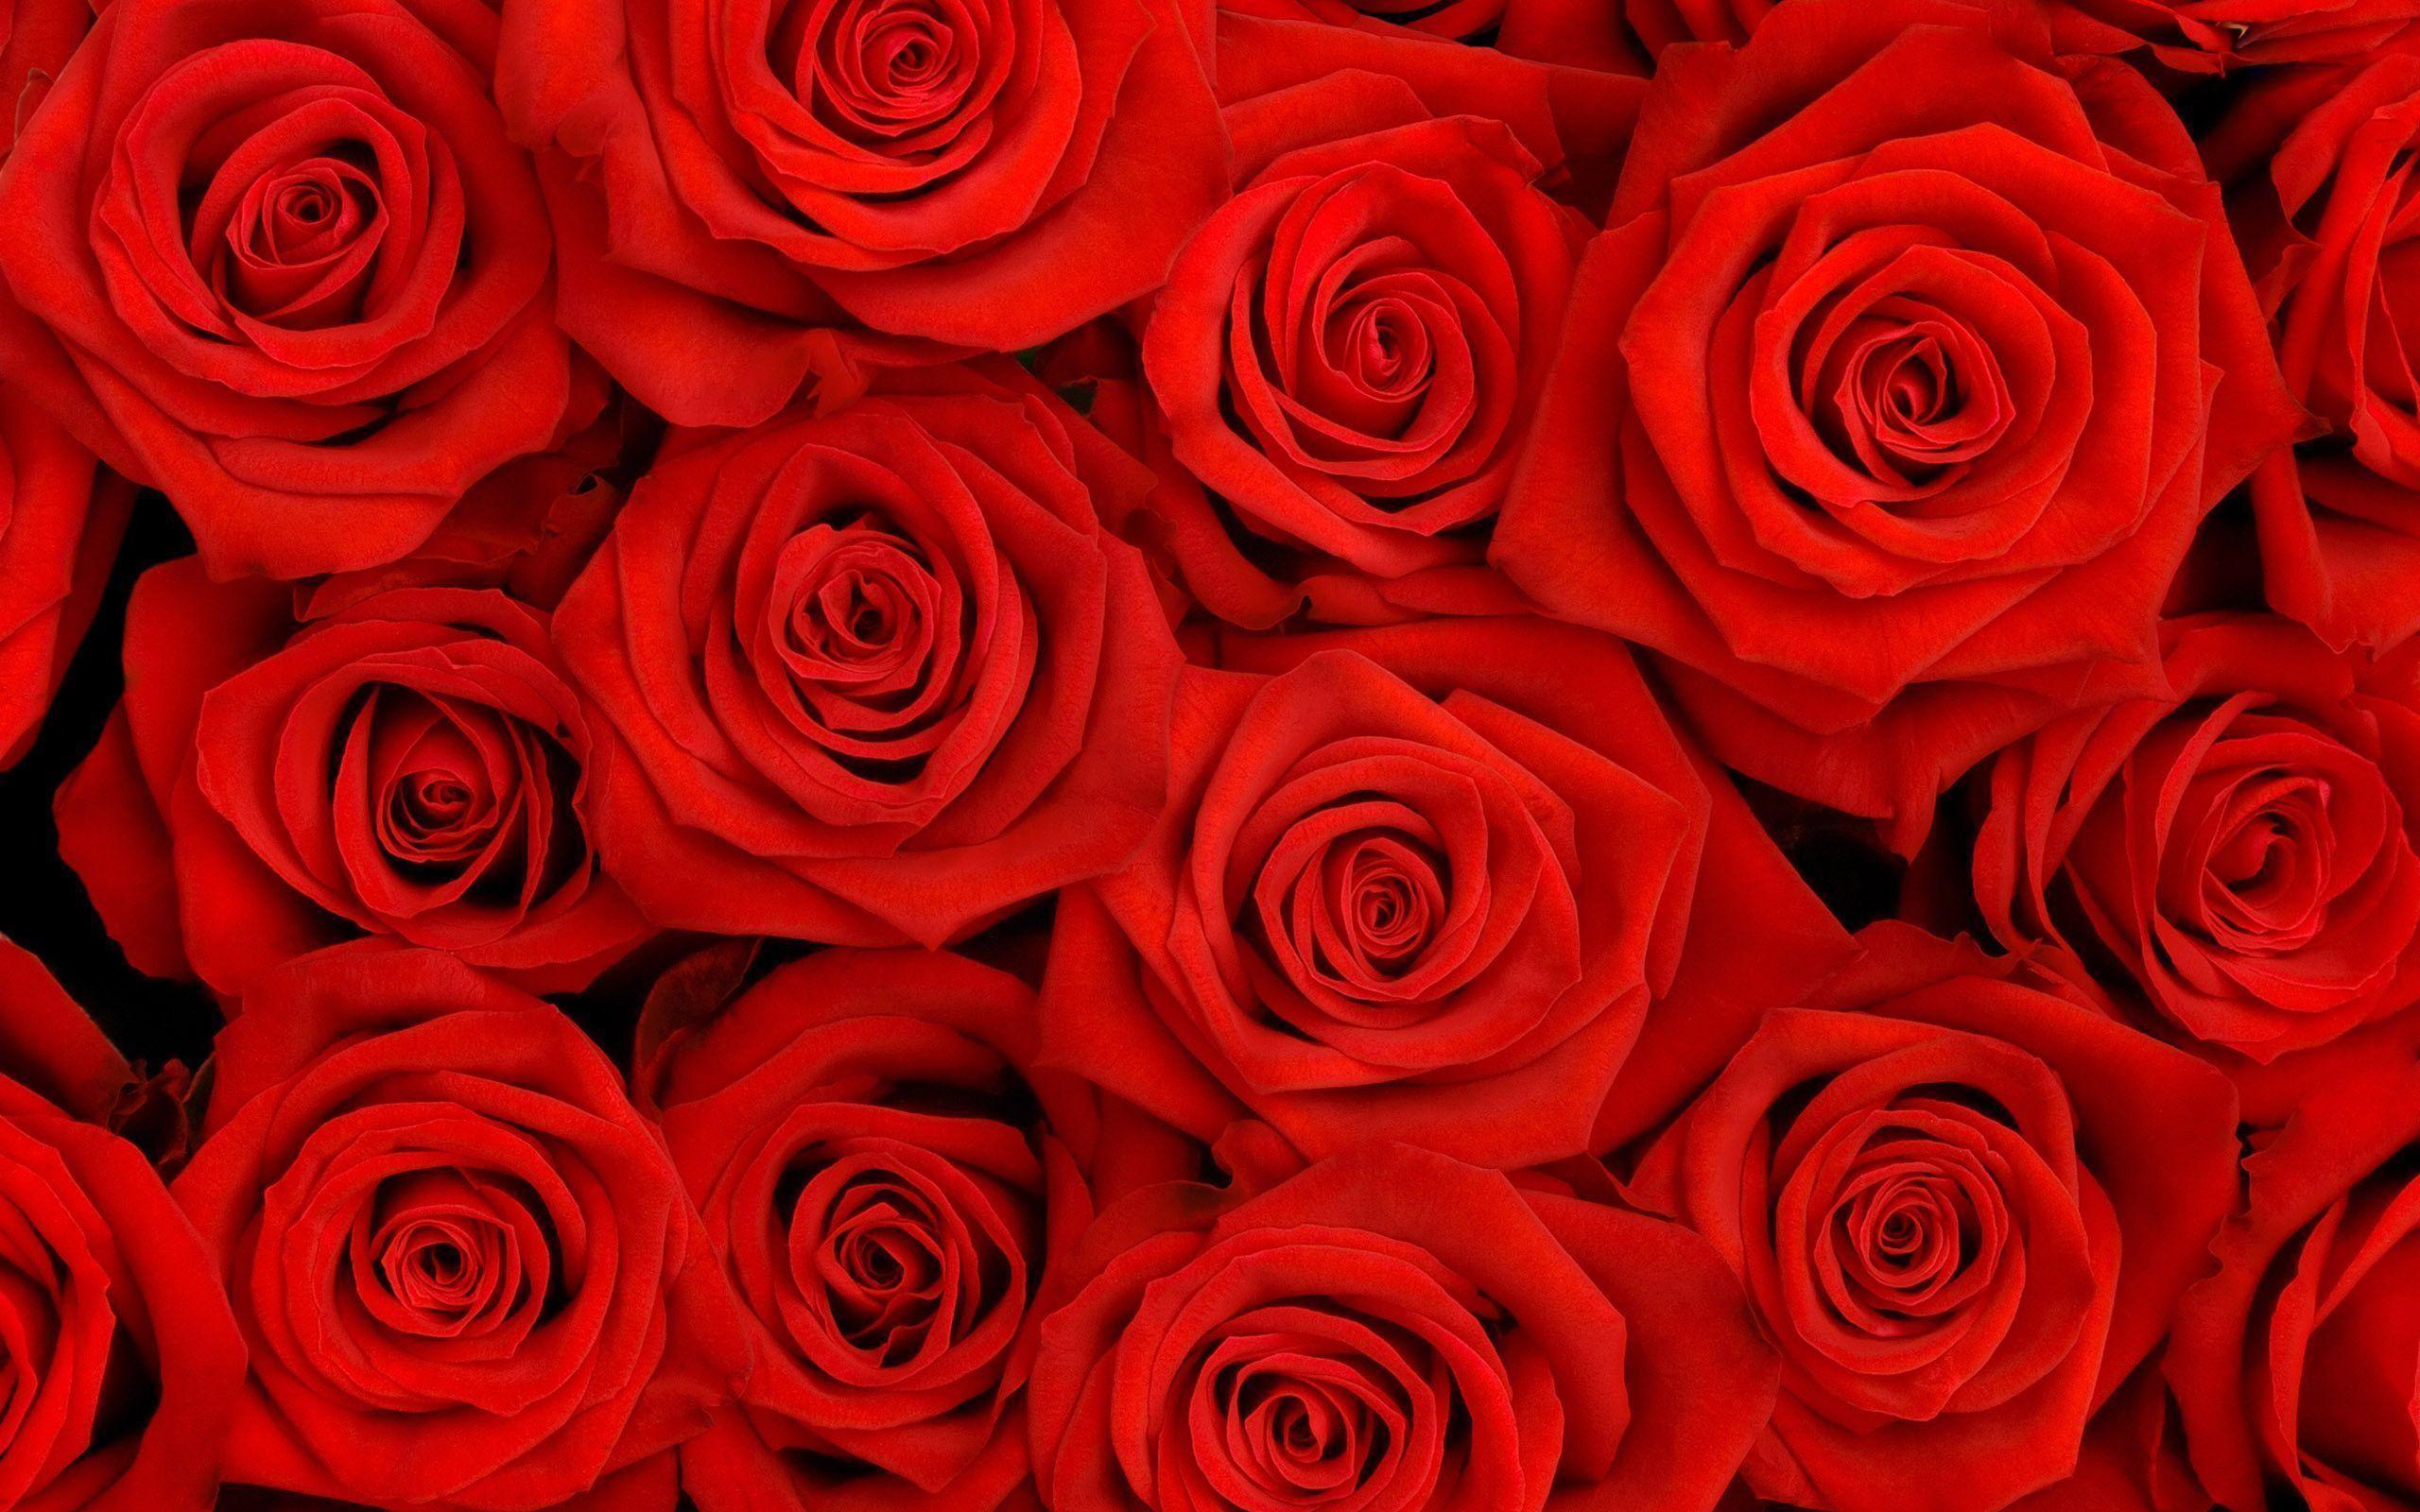 Red Roses Wallpapers Top Free Red Roses Backgrounds Wallpaperaccess Find the best cute red backgrounds on wallpapertag. red roses wallpapers top free red